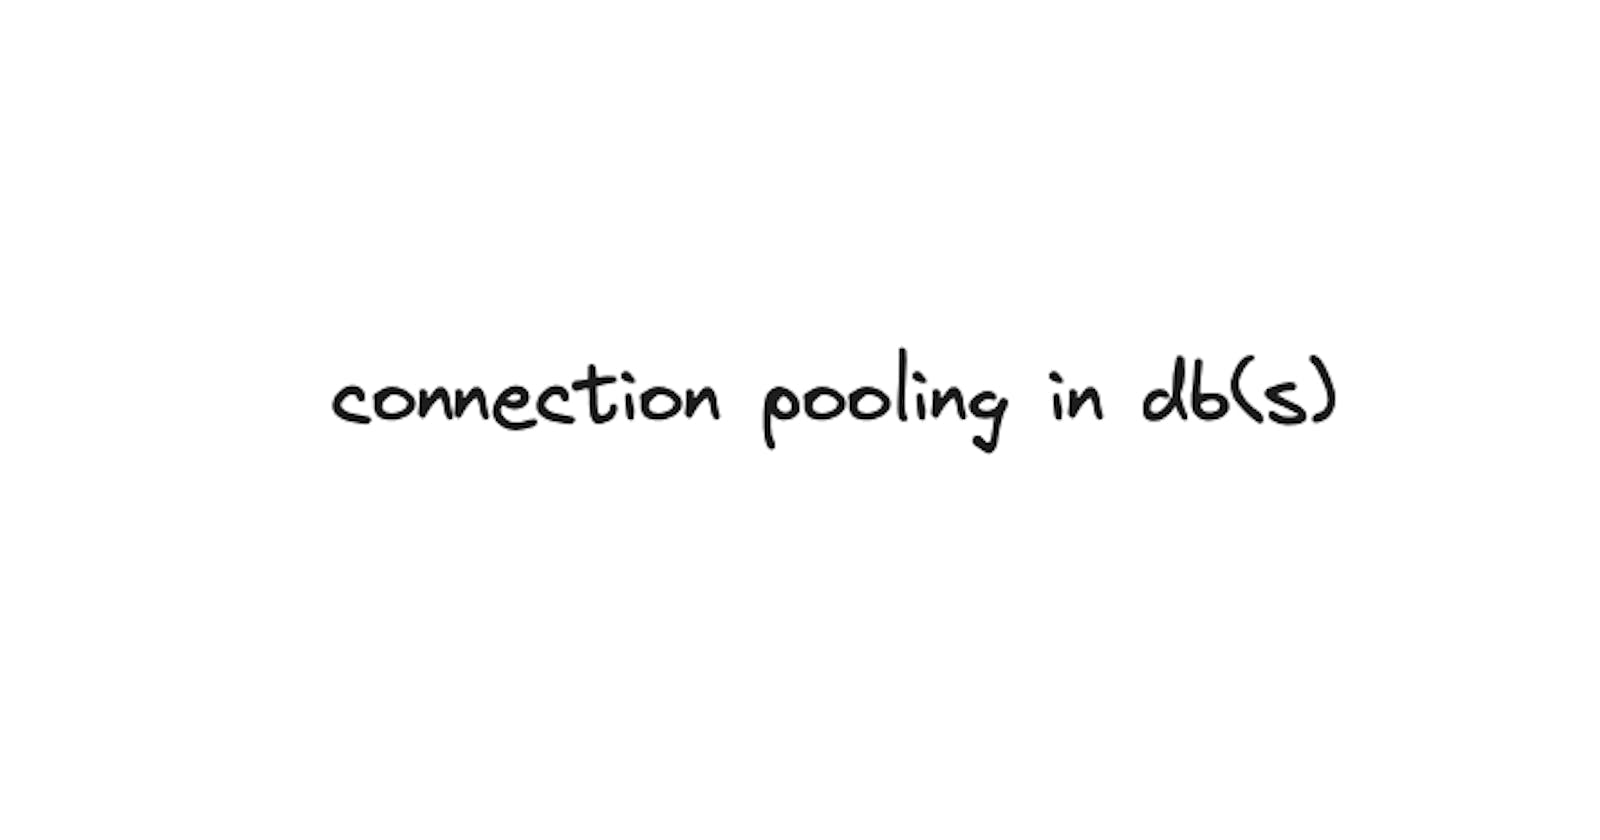 connection pooling in db(s)